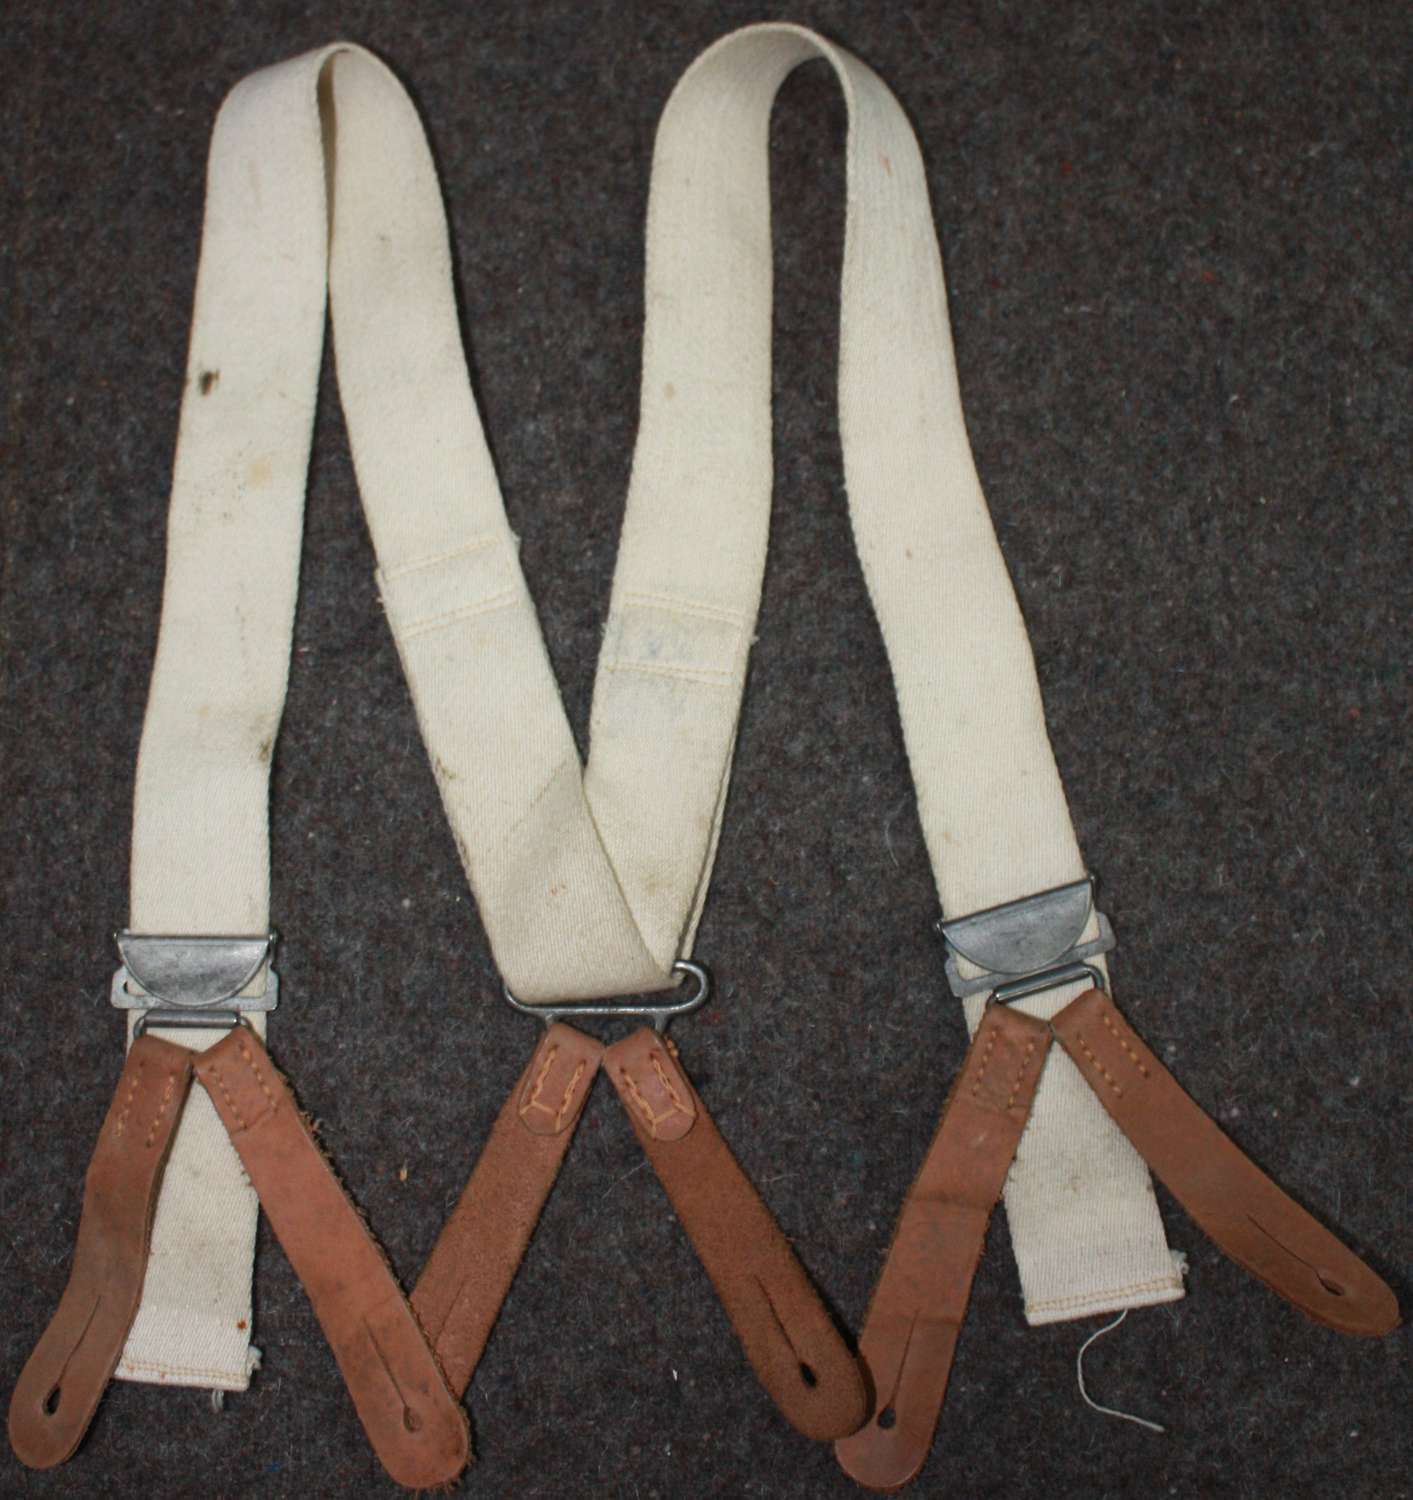 A PAIR OF THE BRITISH ISSUE WWII TROUSERS BRACES